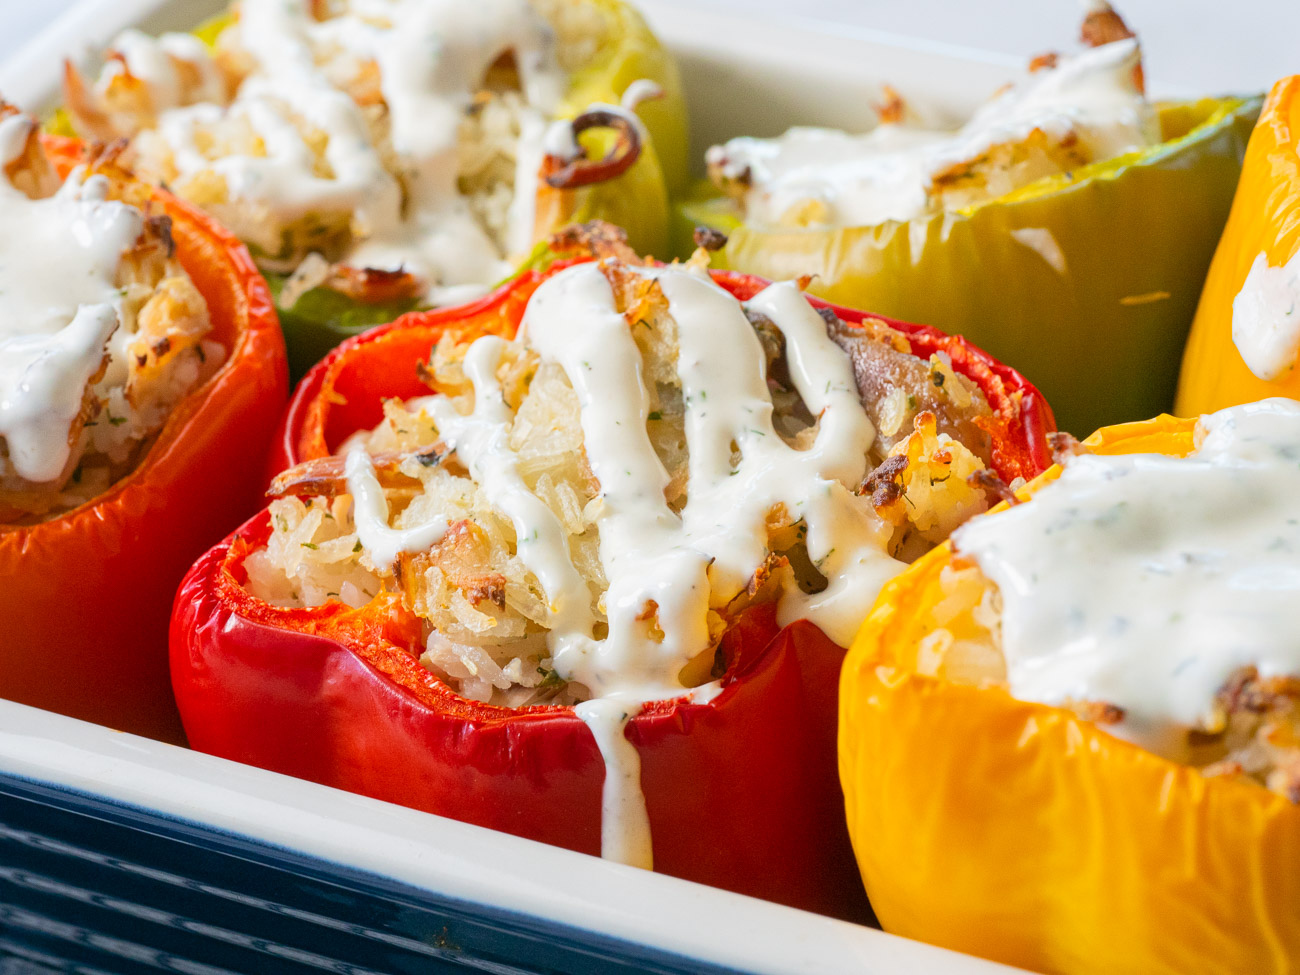 Chicken Stuffed Red Bell Peppers - Sanderson Farms